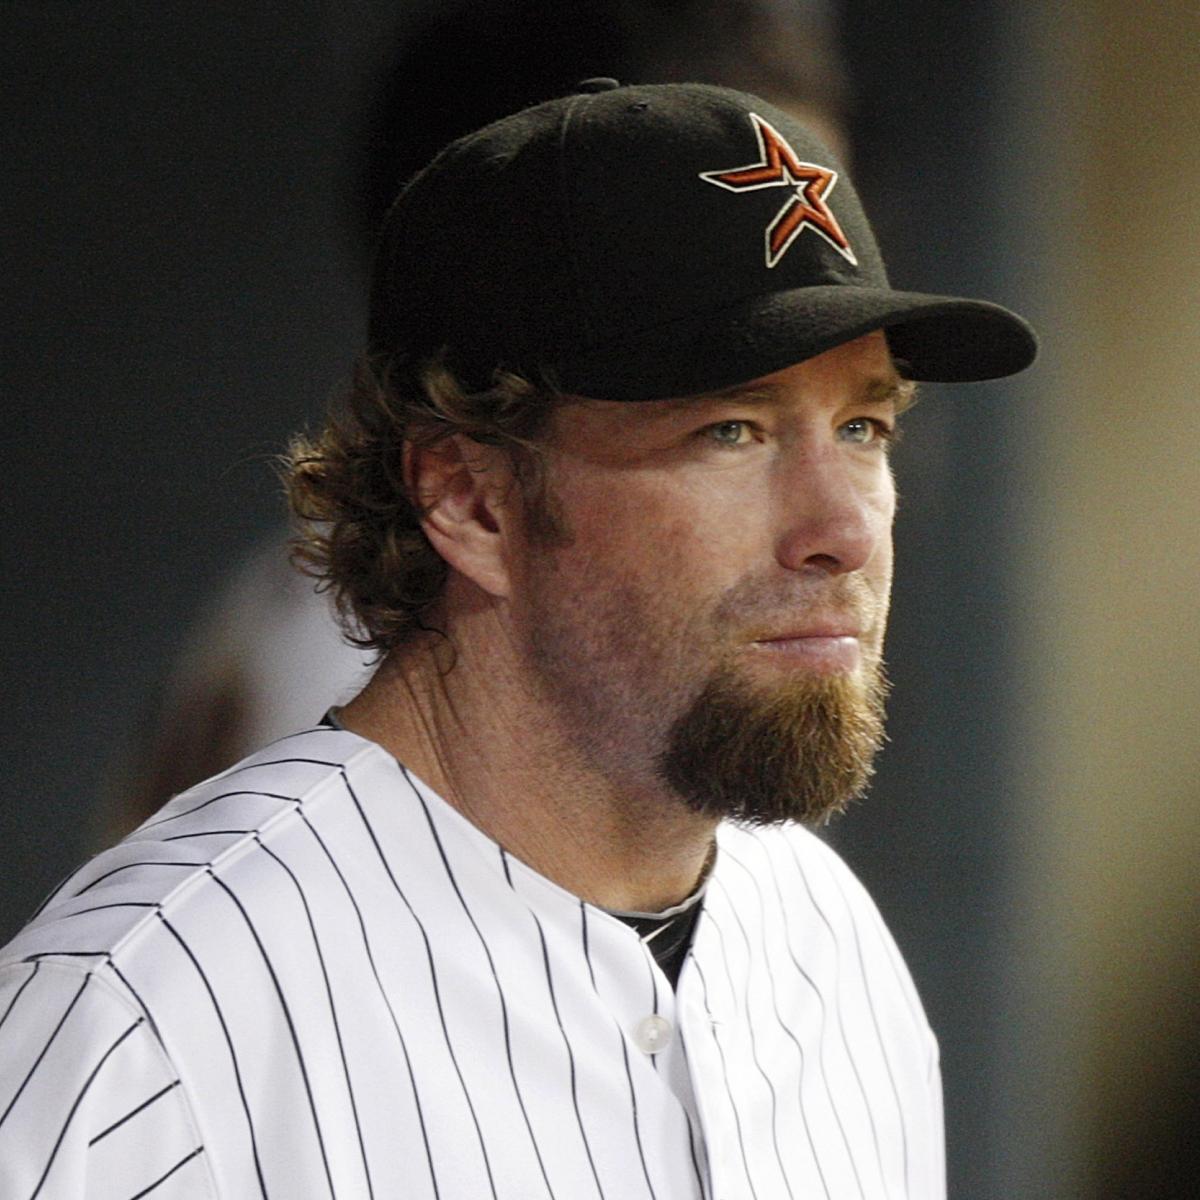 He will always, ALWAYS, be one of the very best to me!  Jeff bagwell,  Houston astros baseball, Astros baseball